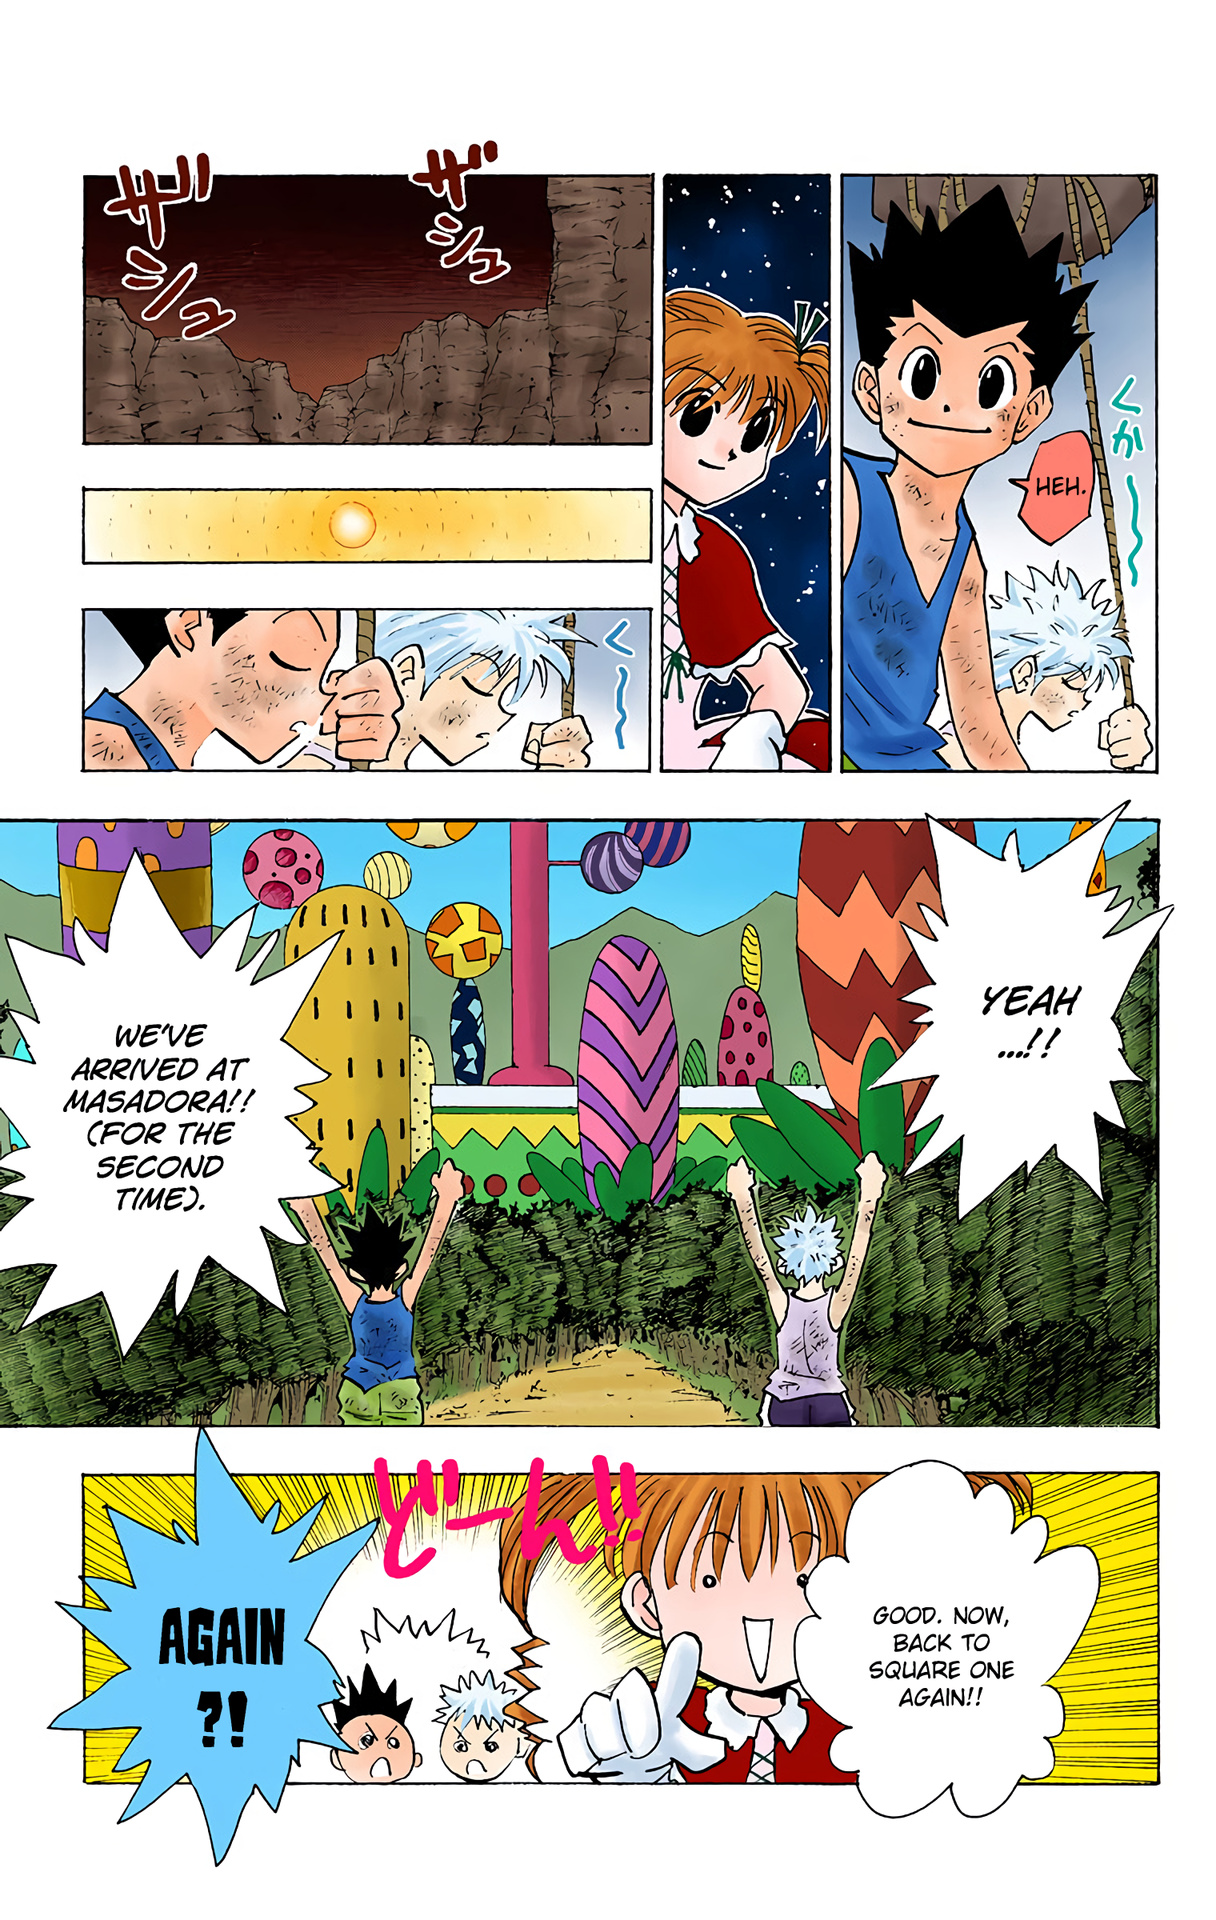 Hunter X Hunter Full Color Vol.15 Chapter 141: They Went To Masadora Already, So I'll Go With A Different Title Now - Picture 3